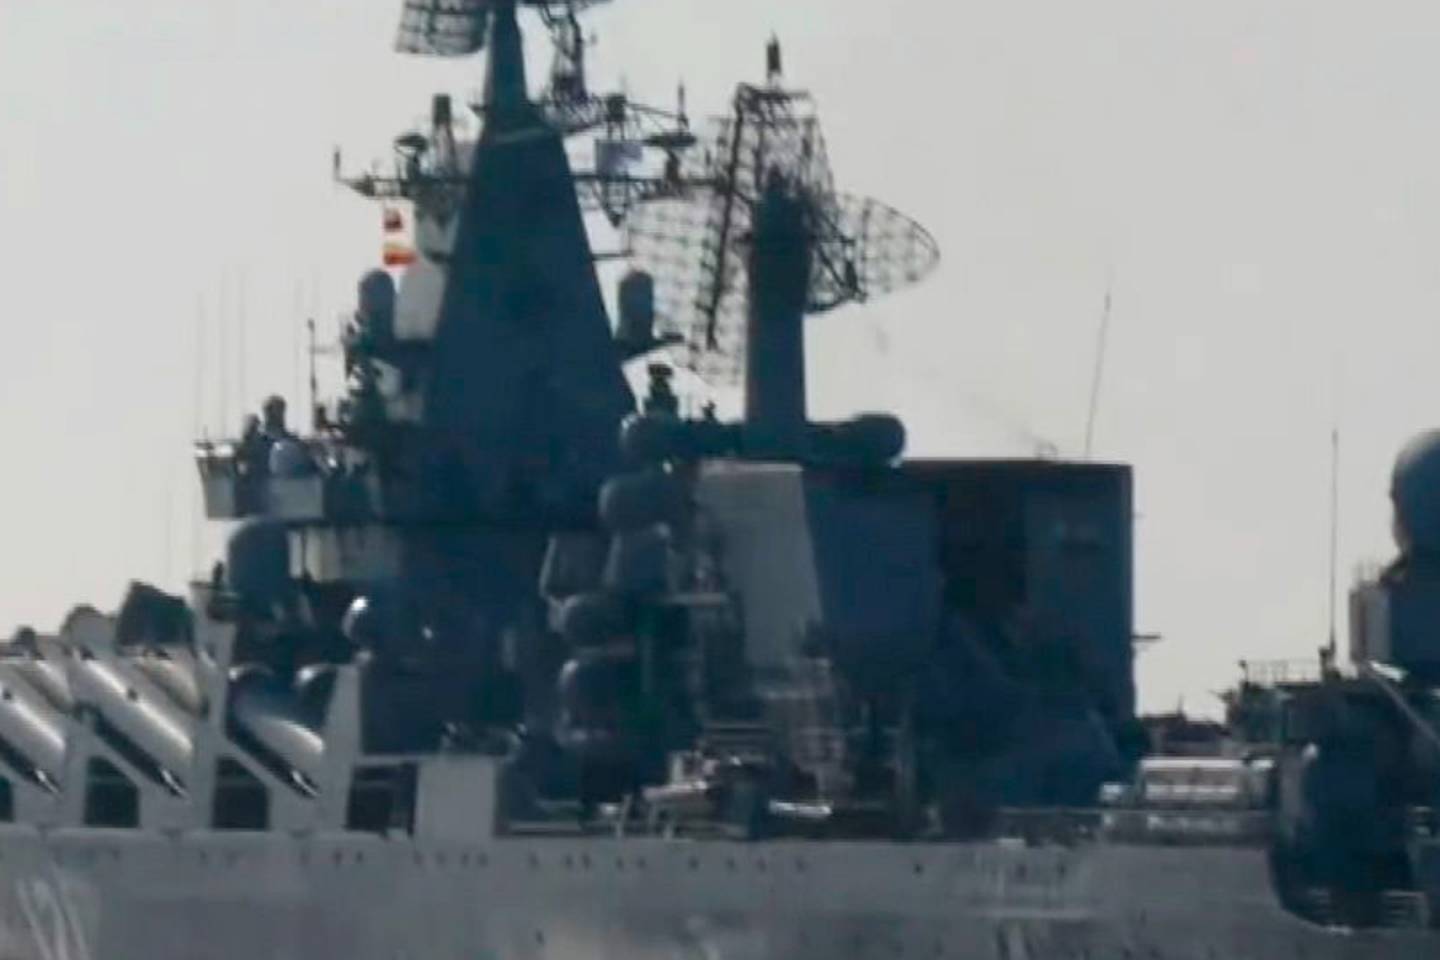 Russia Black Sea flagship, the 'Moskva', sinks after fire